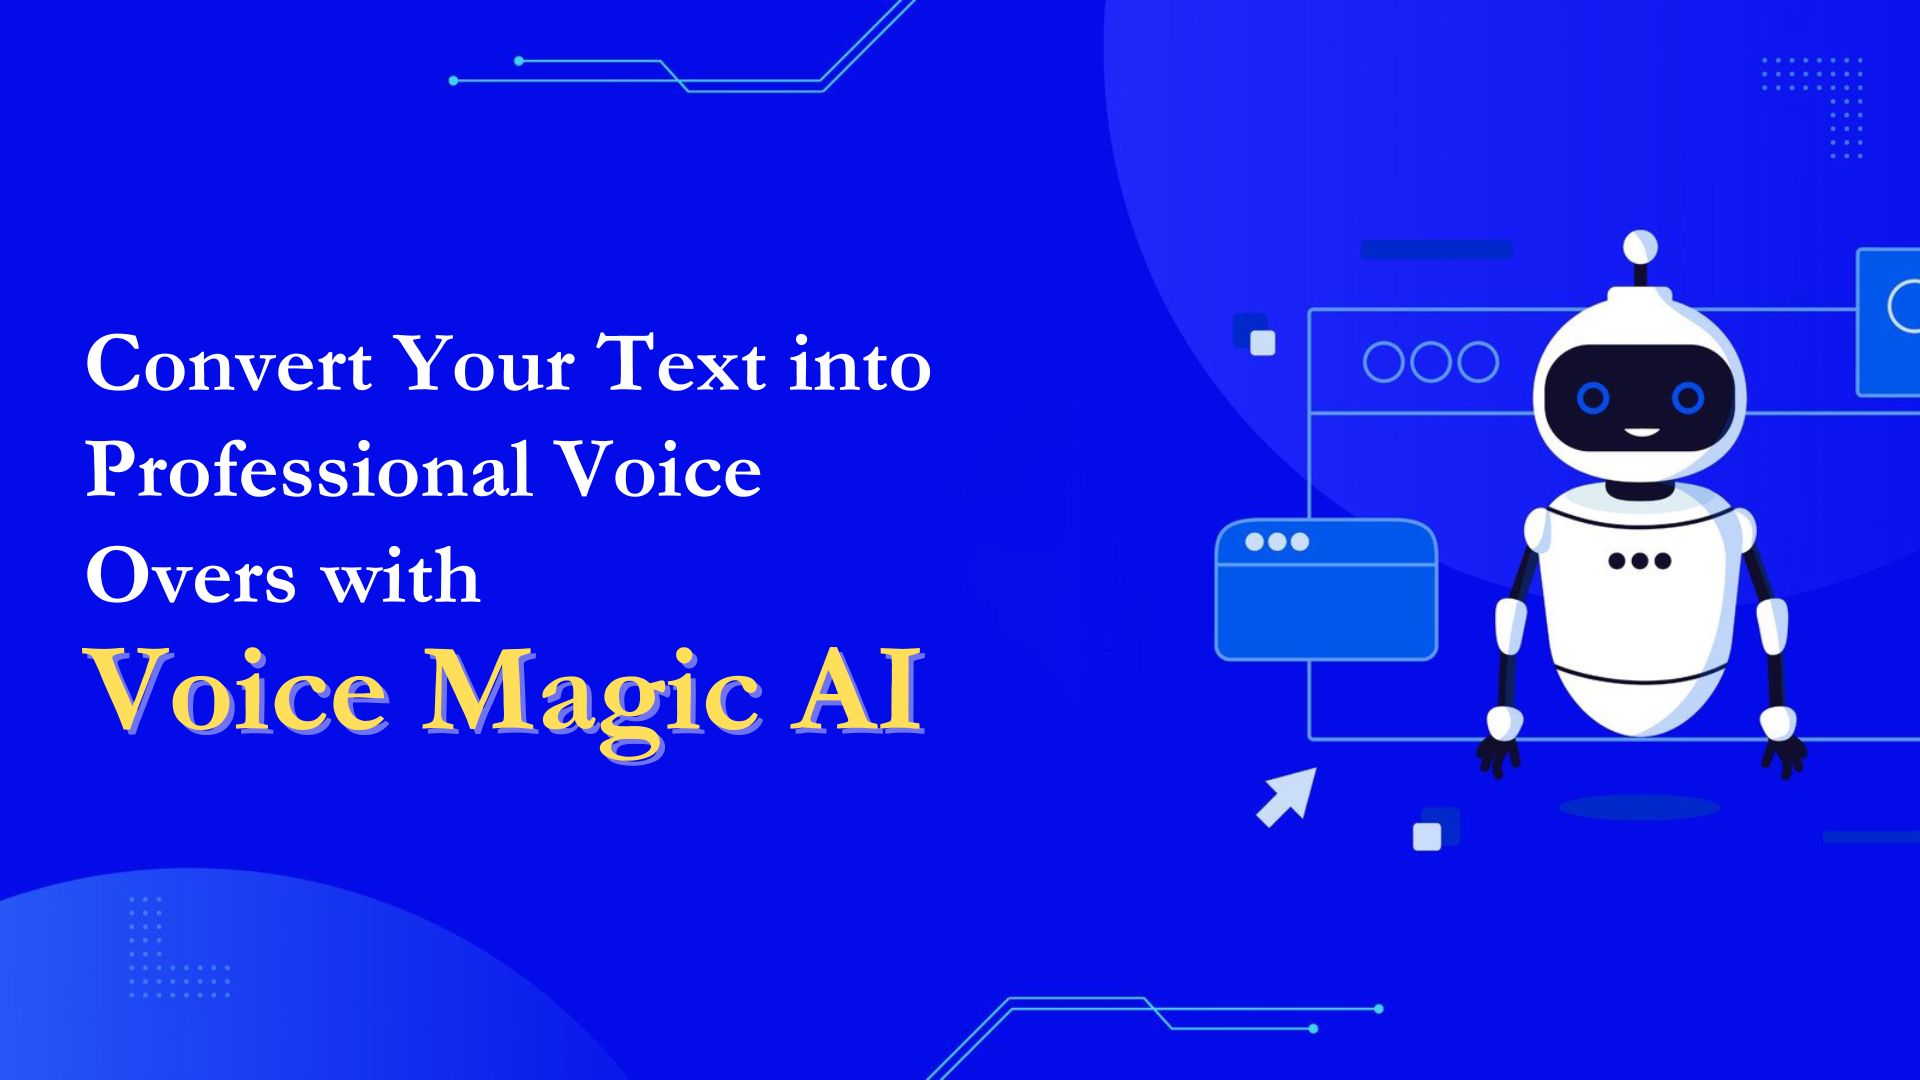 Convert Your Text into Professional Voice Overs with Voice Magic AI